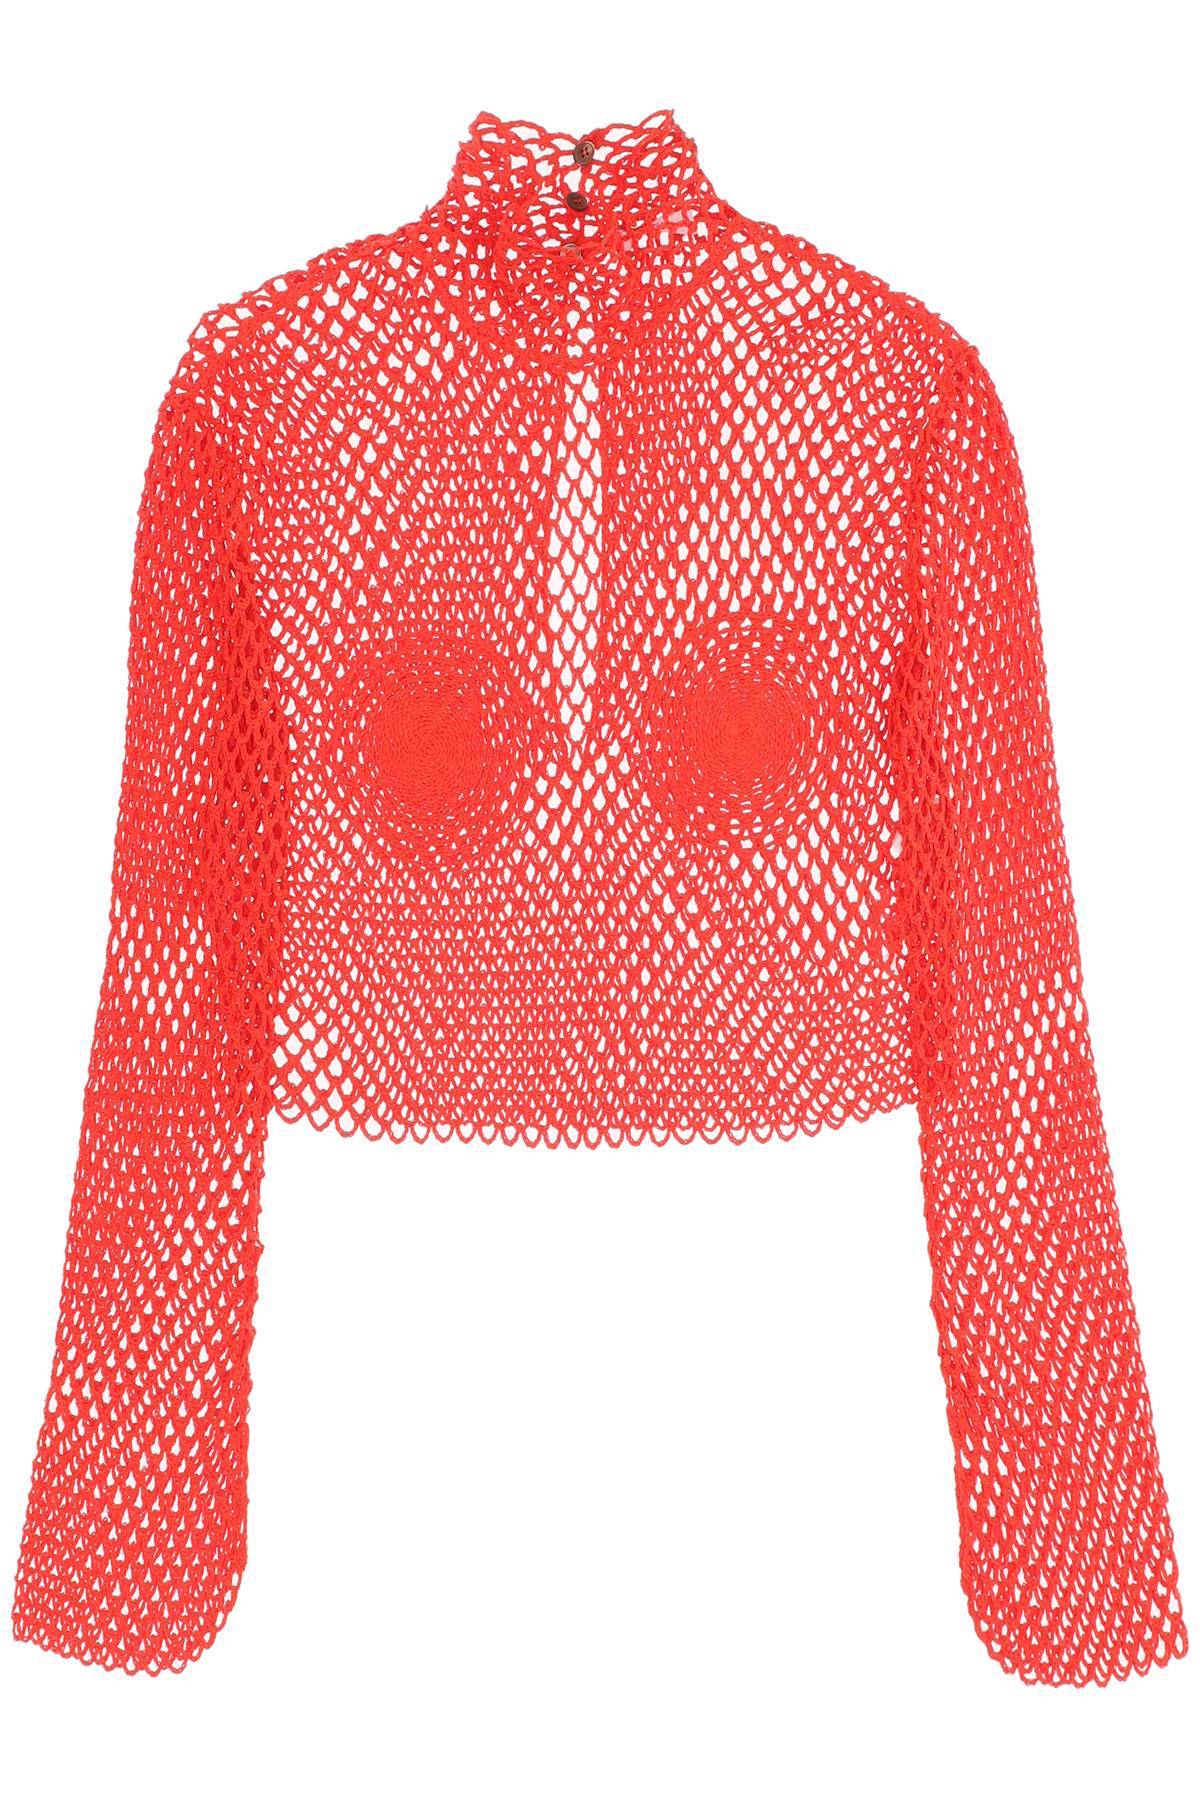 Ferragamo Stand Collar Top In Fishnet Knit In Red